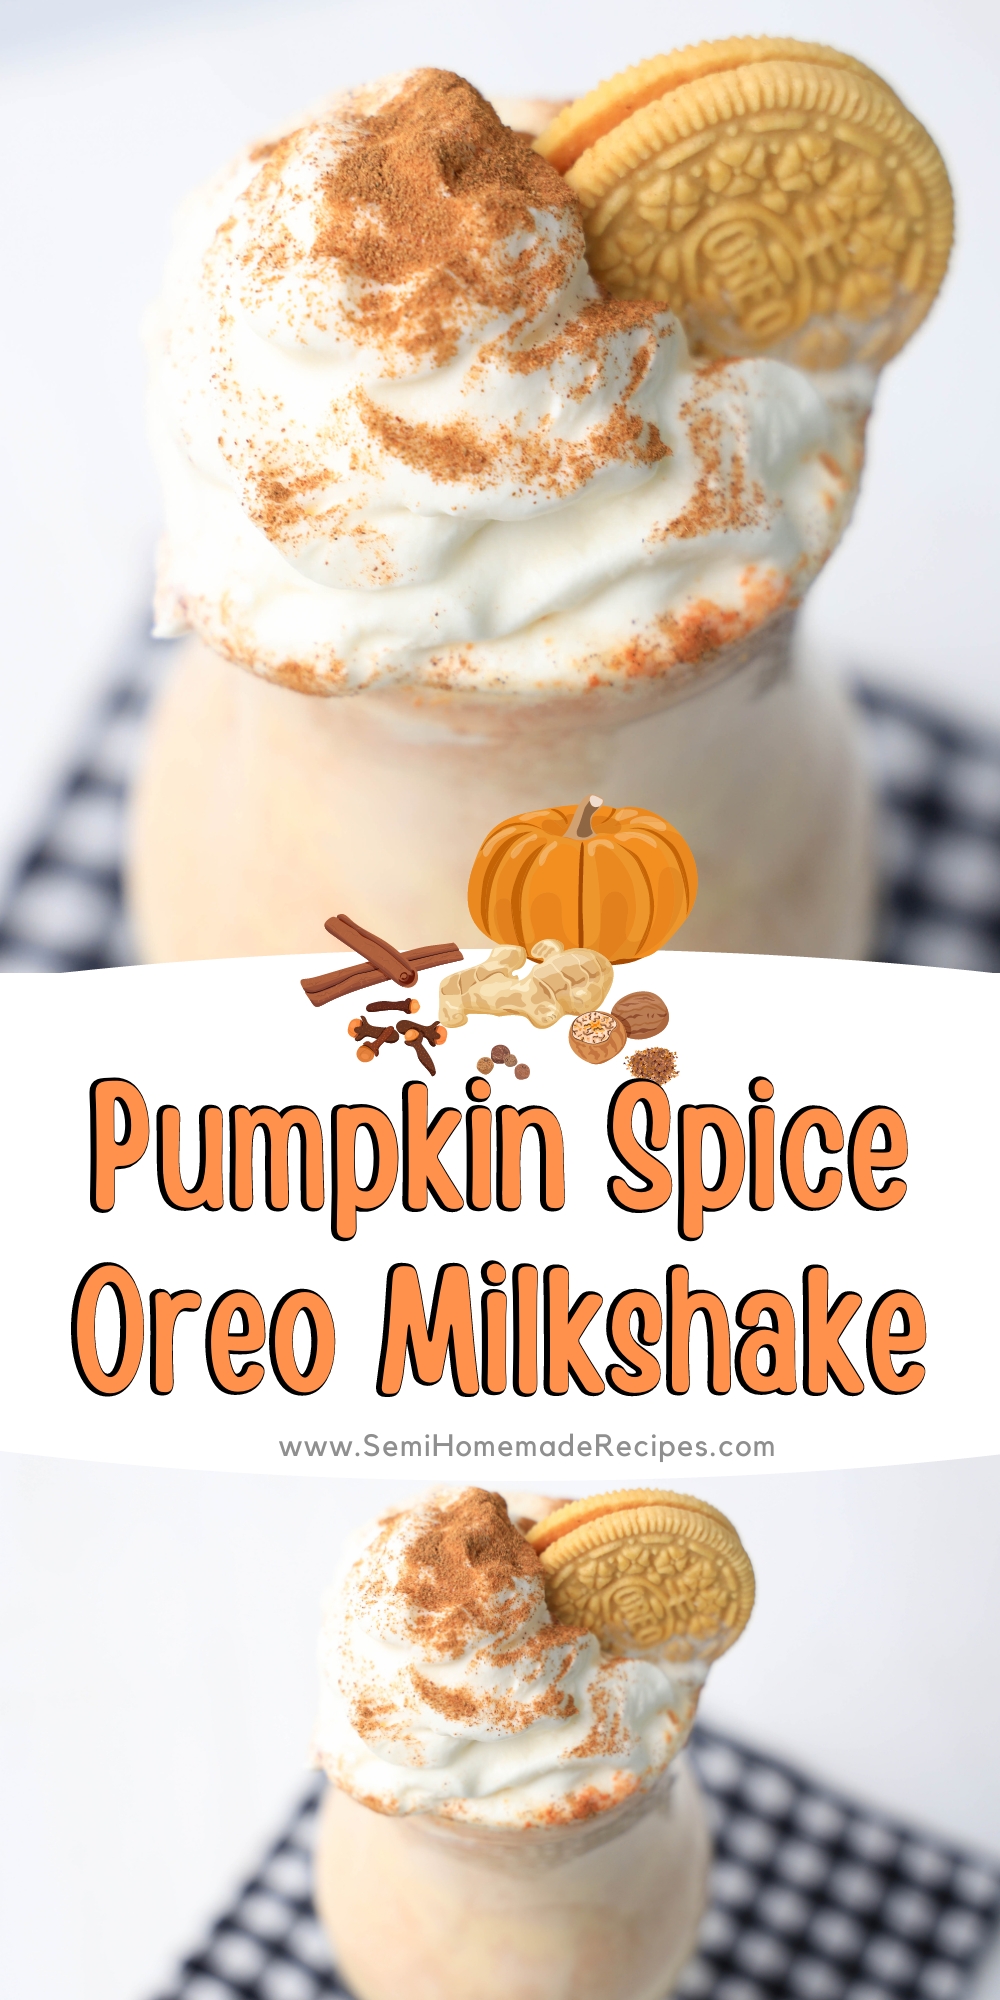 Autumn and Summer collide with this Pumpkin Spice Oreo Milkshake! We're using Pumpkin Spice Oreos and Vanilla Ice Cream to make a cool treat with great fall flavor! 